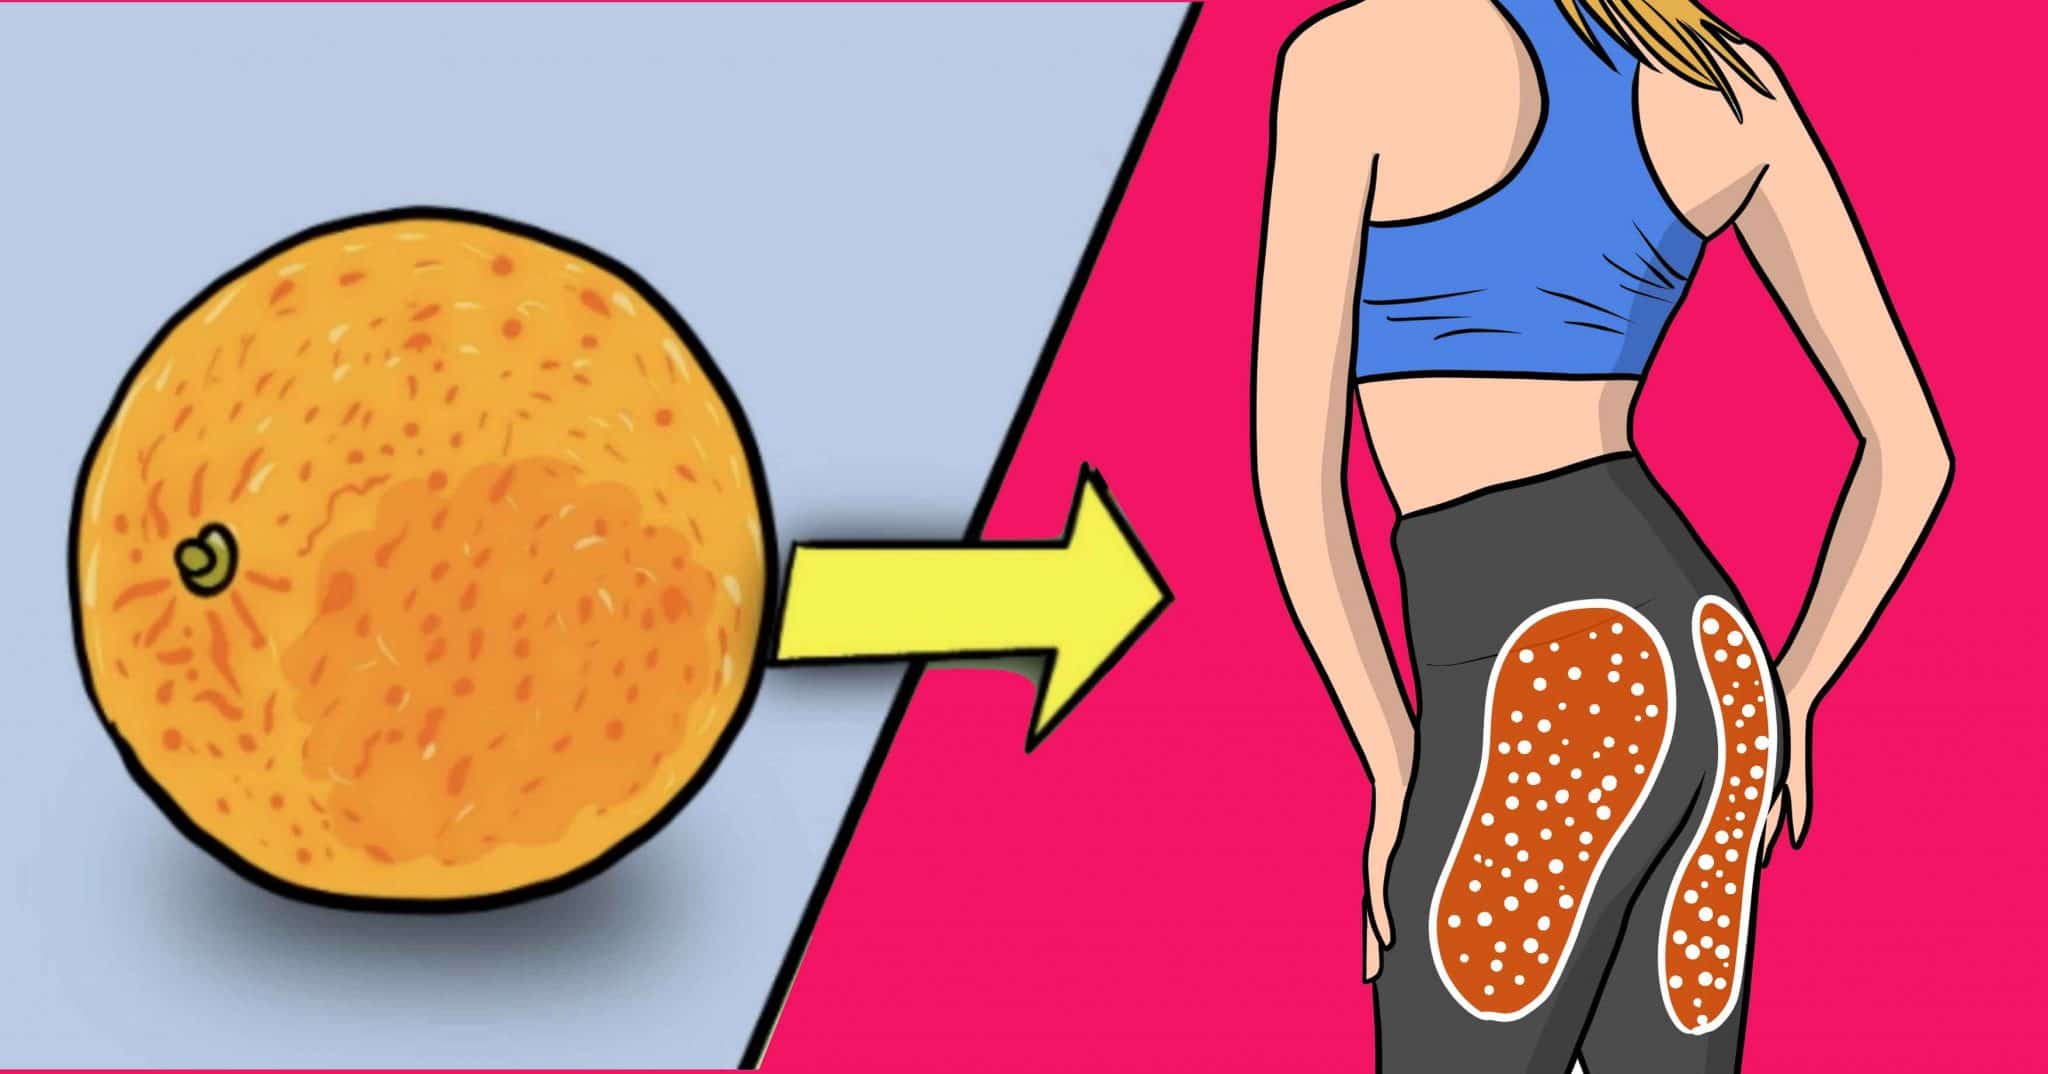 7 Ways To Get Rid Of Cellulite